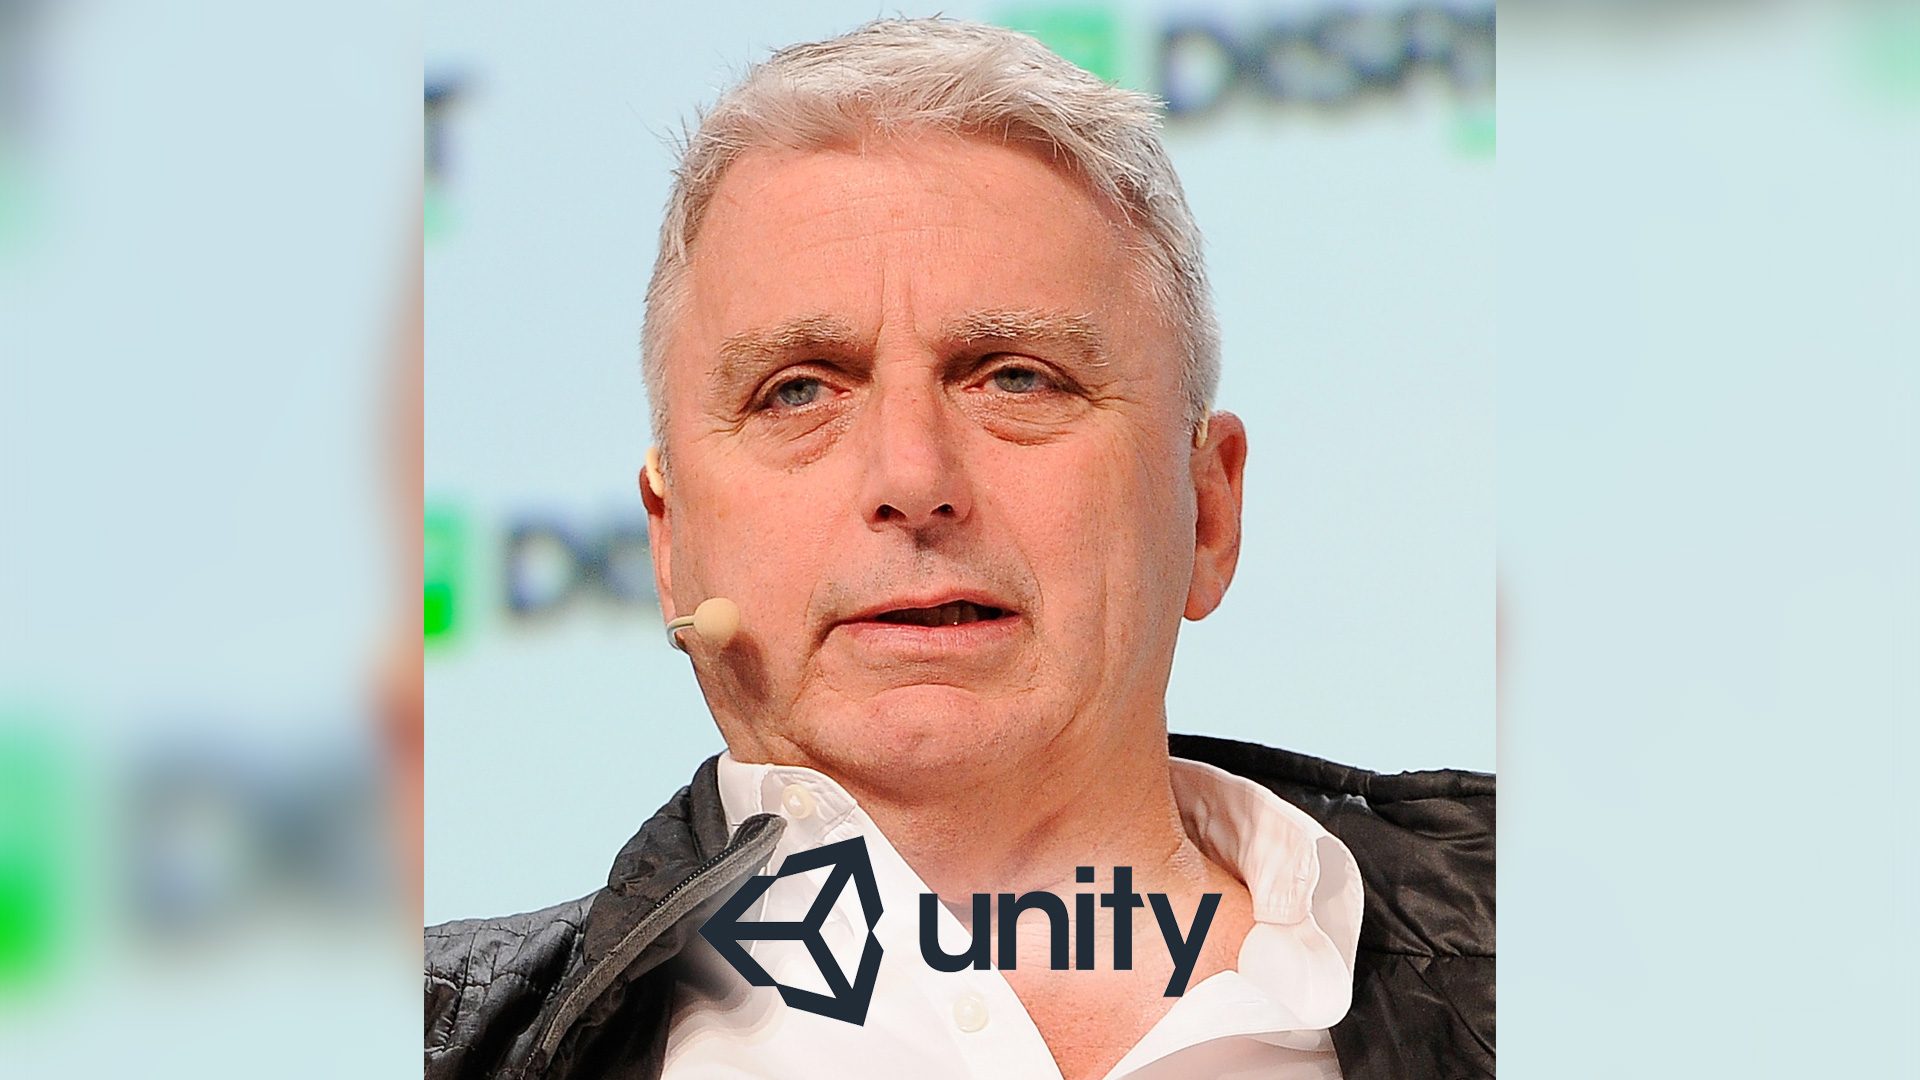 Unity CEO John Riccitiello steps down weeks after ‘runtime fee’ controversy